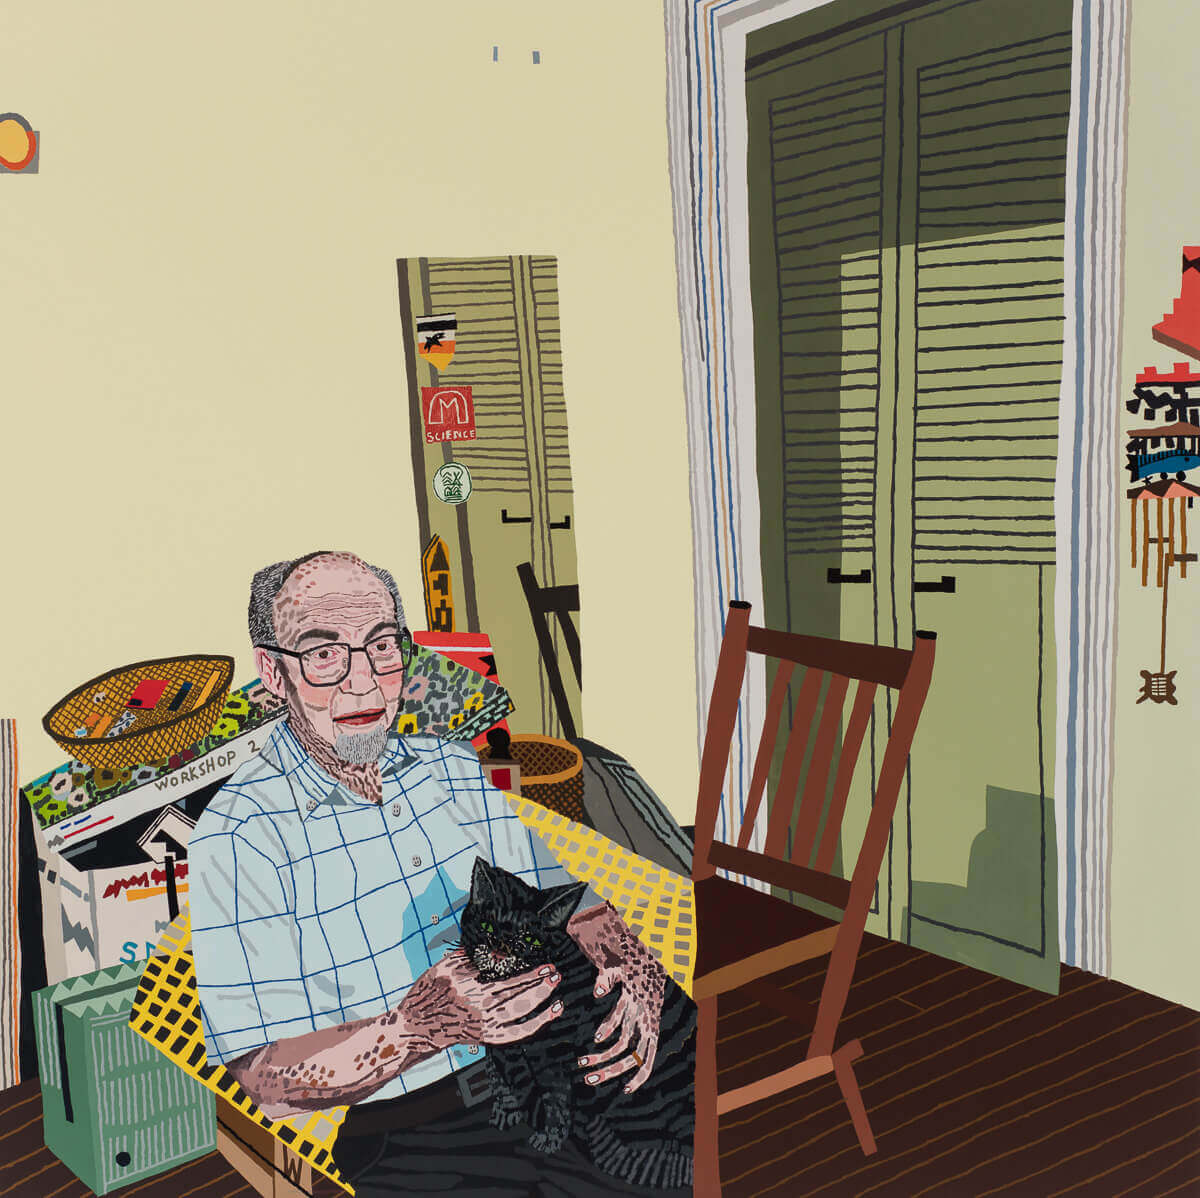 Jonas Wood, Rosy In My Room With His Cat, 2016, oil and acrylic on canvas, 68 x 68 inches (courtesy of Anton Kern Gallery)